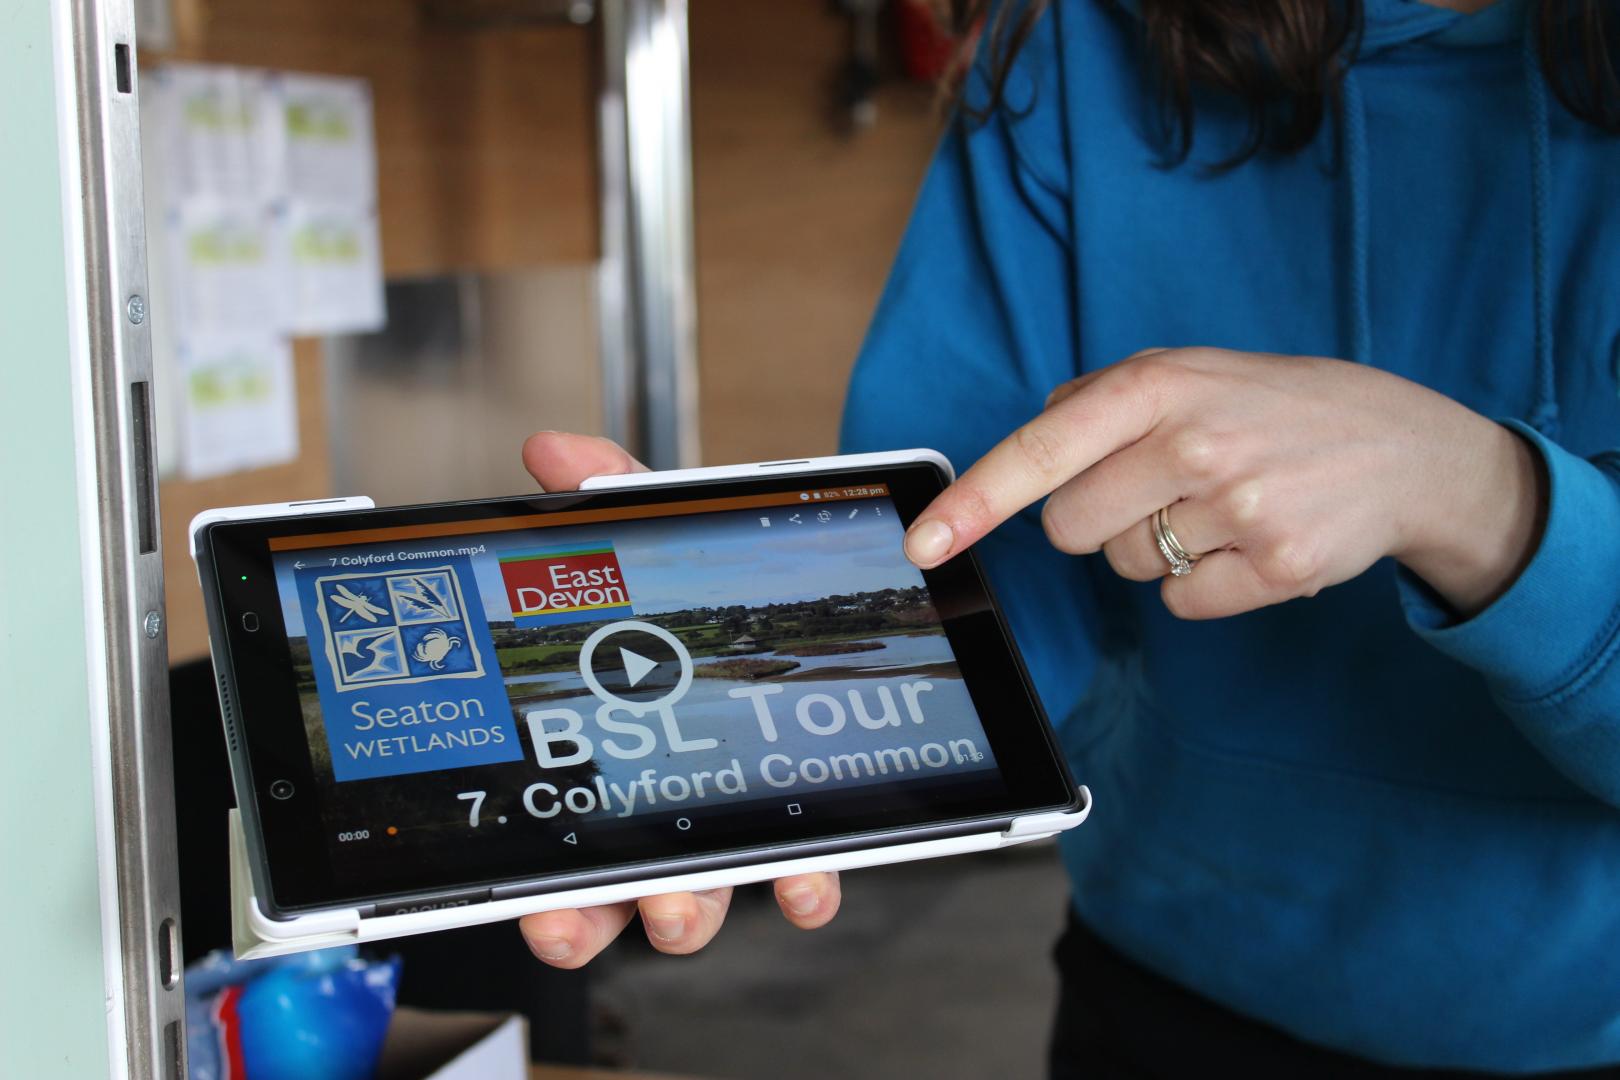 A tablet held by a person is showing an audio tour ready to play